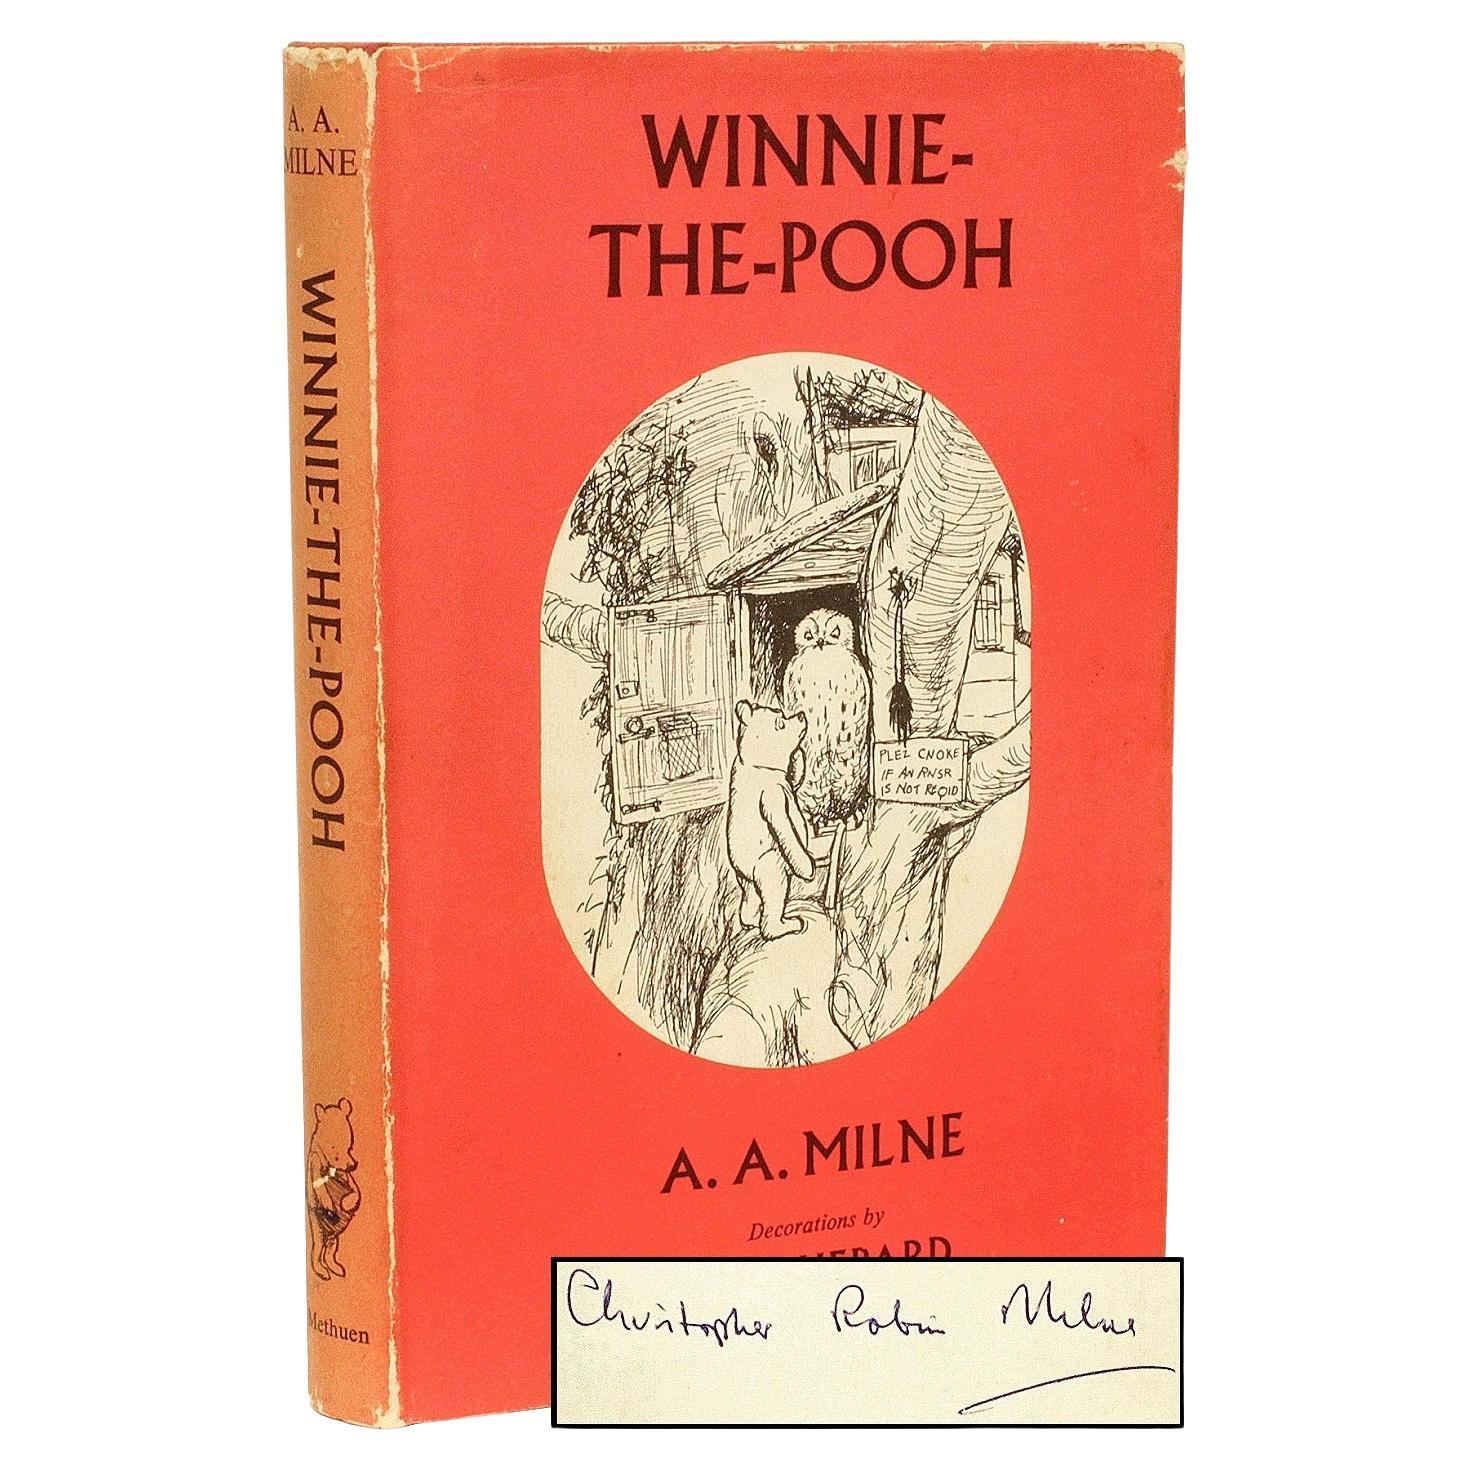 A. MILNE. Winnie Puuh. SIGNED UND DATED BY CHRISTOPHER (ROBIN) MILNE!